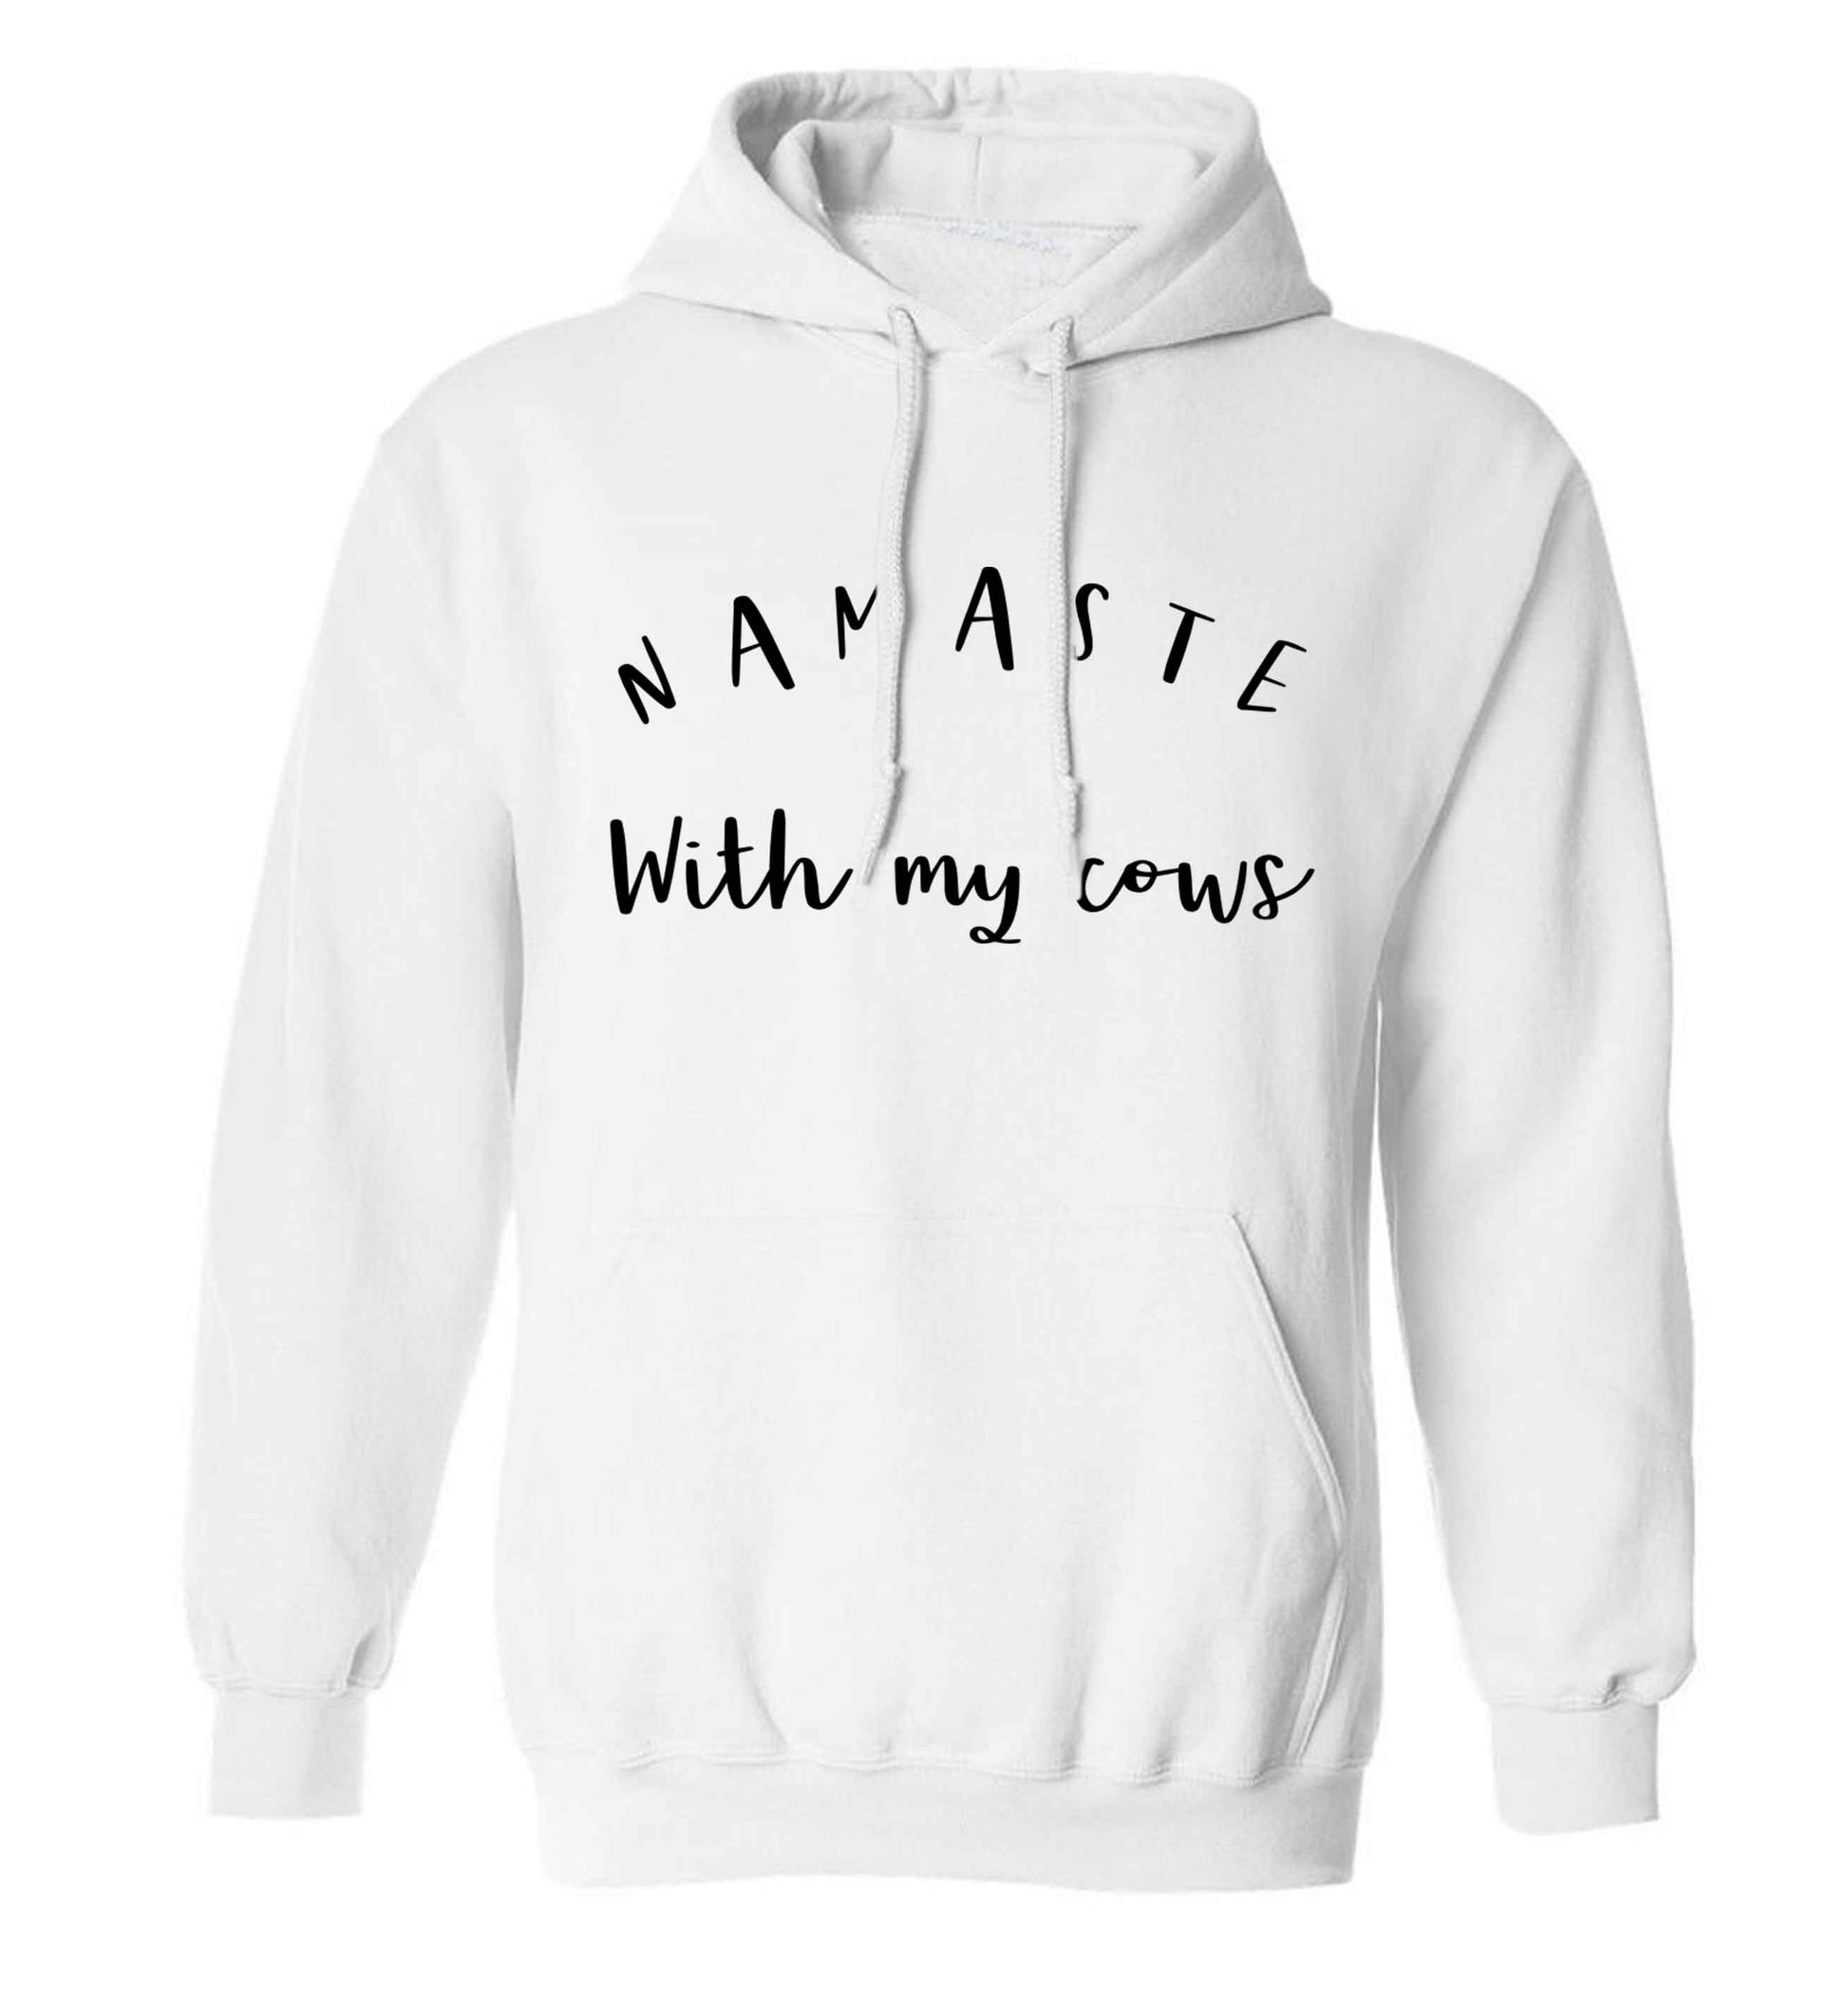 Namaste with my cows adults unisex white hoodie 2XL